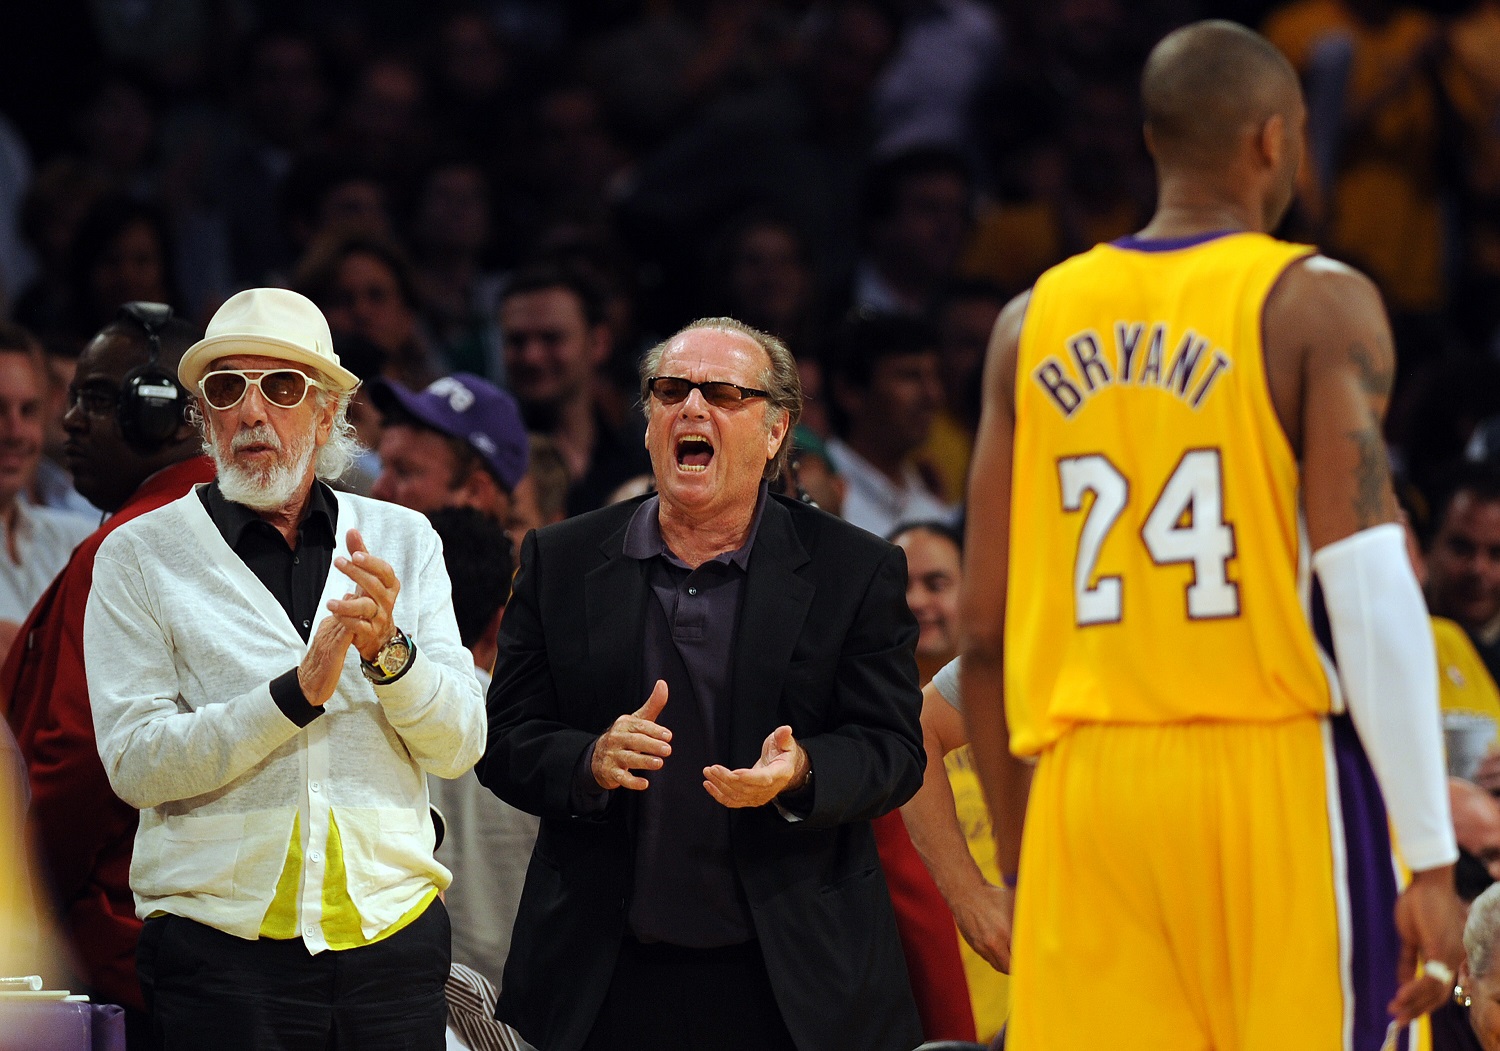 Record producer Lou Adler and actor Jack Nicholson cheer the Los Angeles Lakers' Kobe Bryant during Game 4 of the 2008 NBA Finals against the Boston Celtics in Los Angeles.